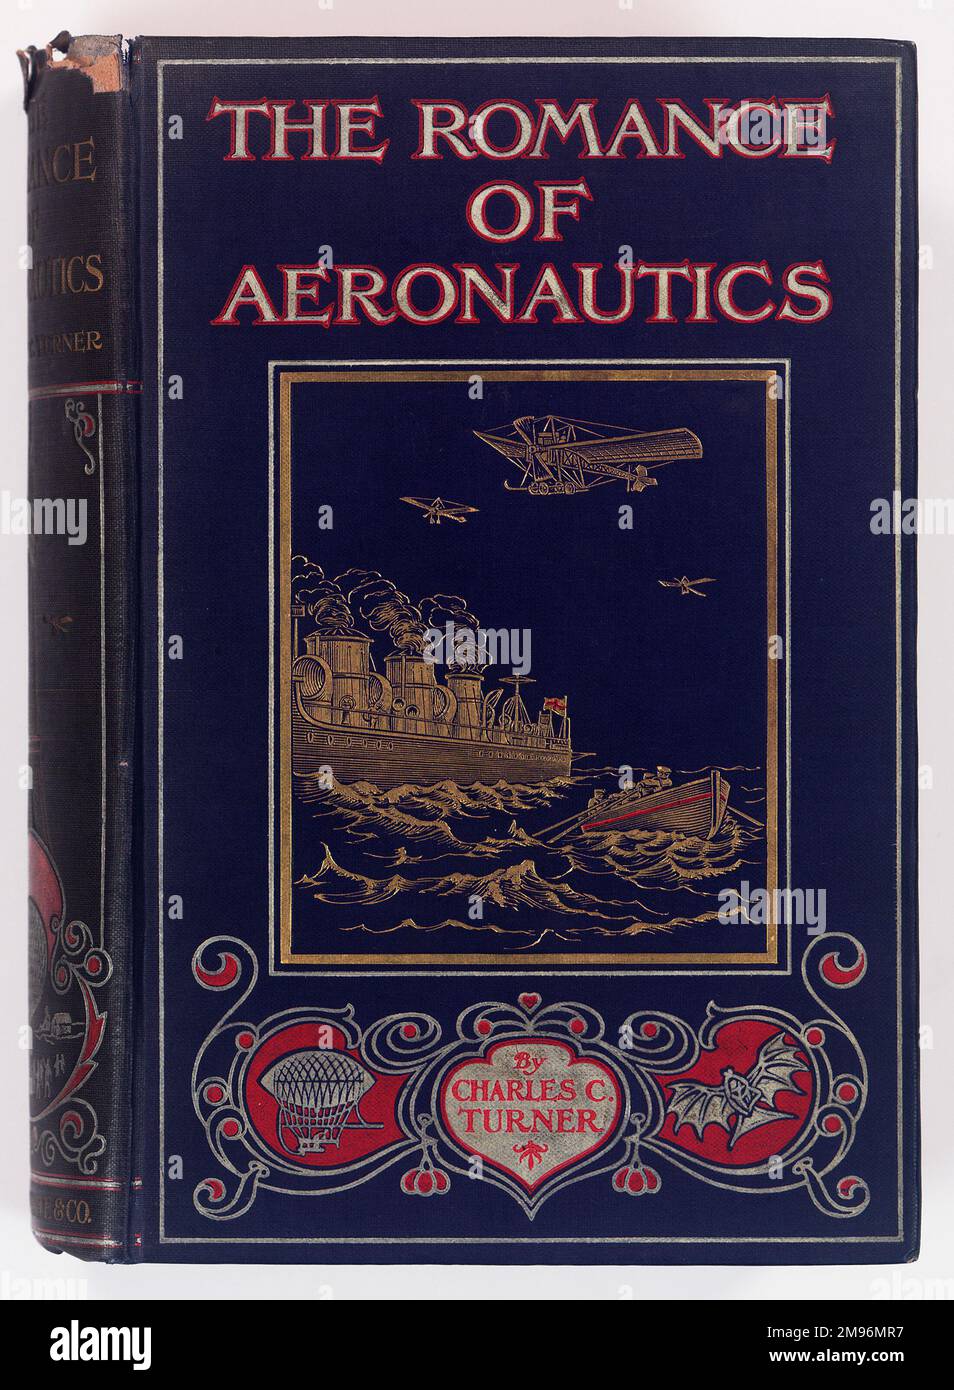 Book cover design, The Romance of Aeronautics: an Interesting Account of the Growth and Achievements of All Kinds of Aerial Craft, by Charles C Turner, London: Seeley, Service & Co. Limited, 1912. Stock Photo